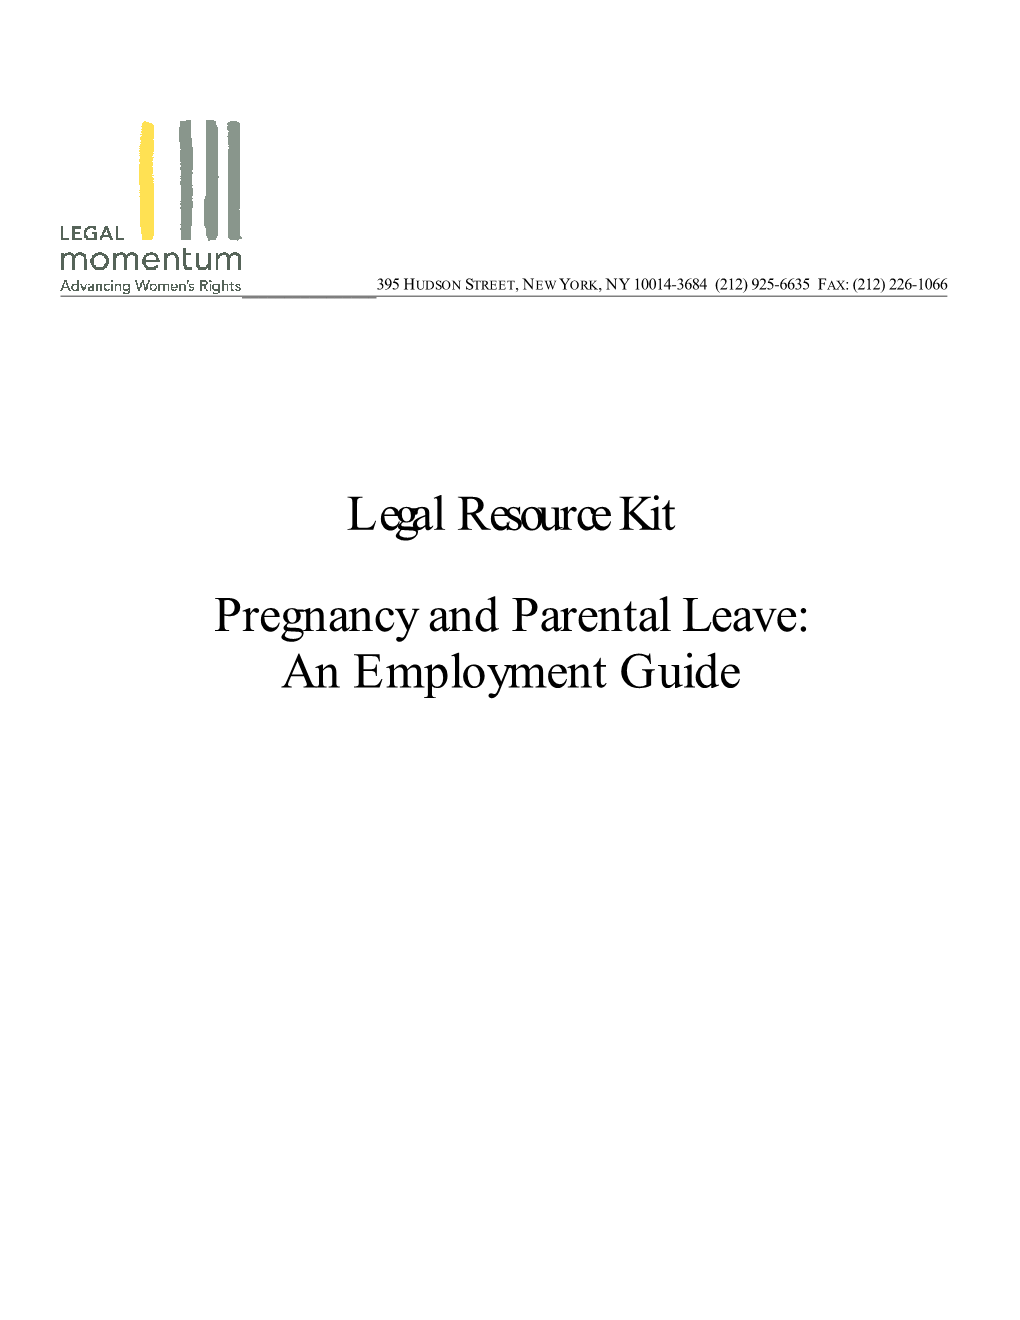 Legal Resource Kit Pregnancy and Parental Leave: an Employment